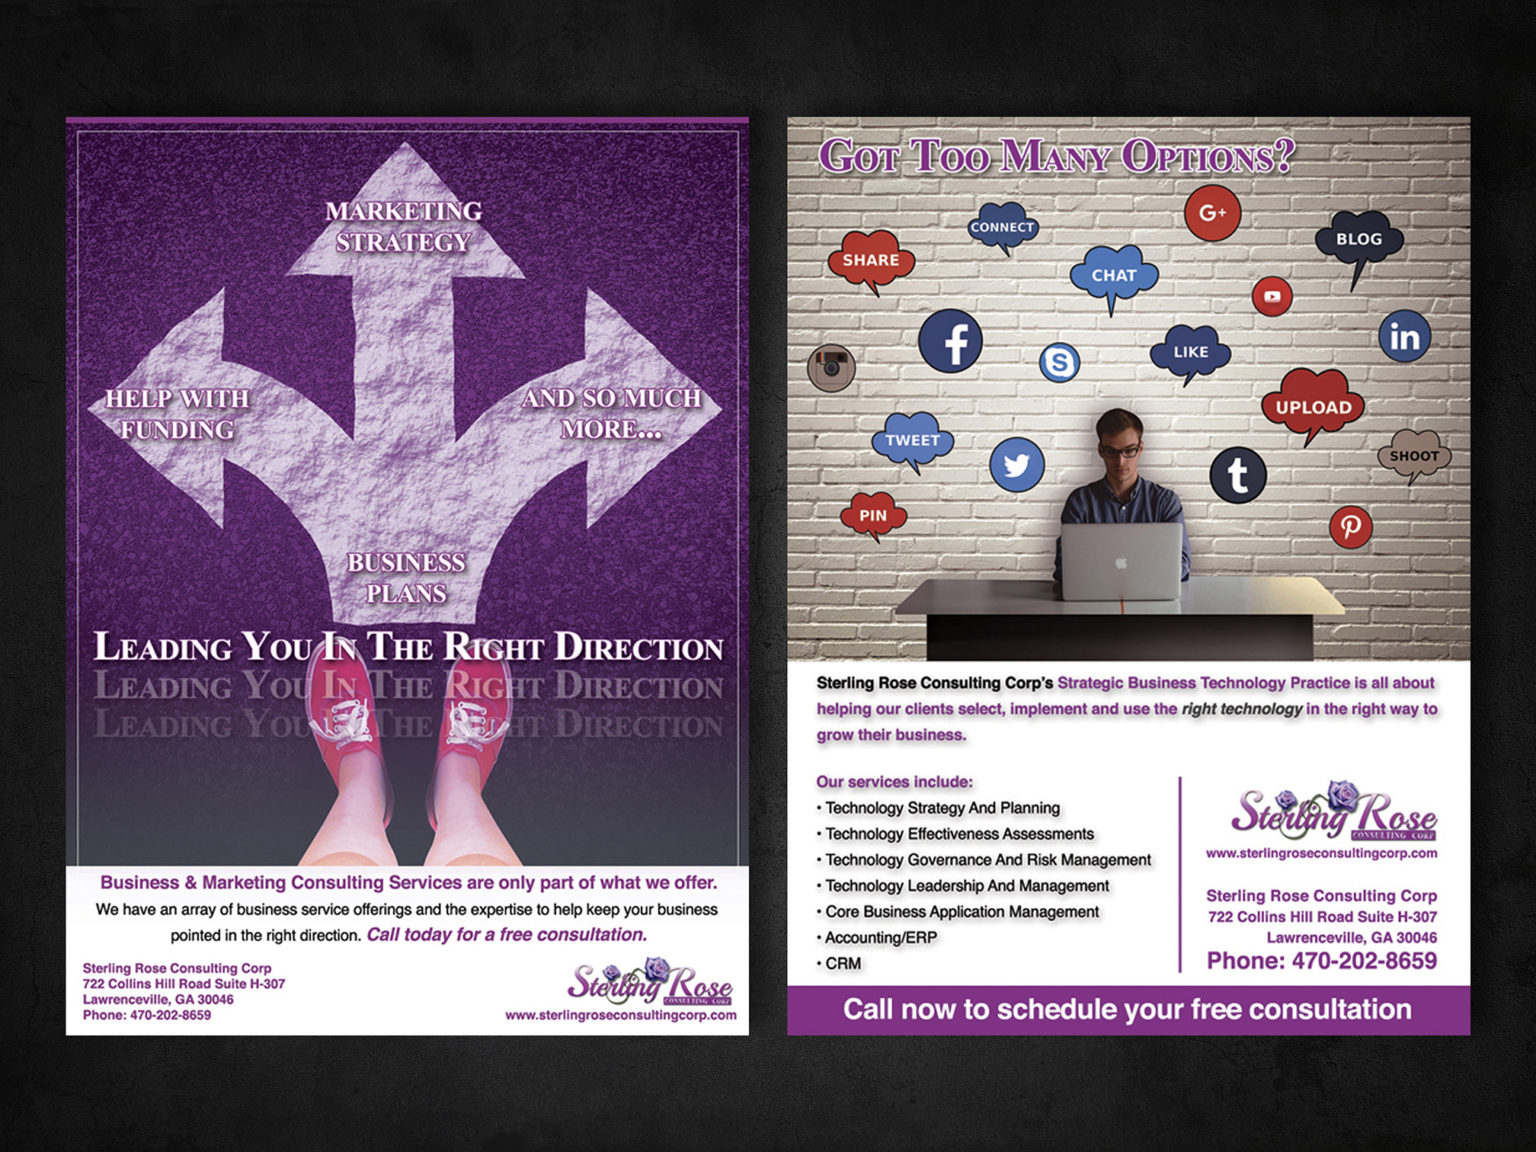 Sterling Rose Consulting Corp Marketing Print Ads • Designed by: Designs In Motion, Inc.